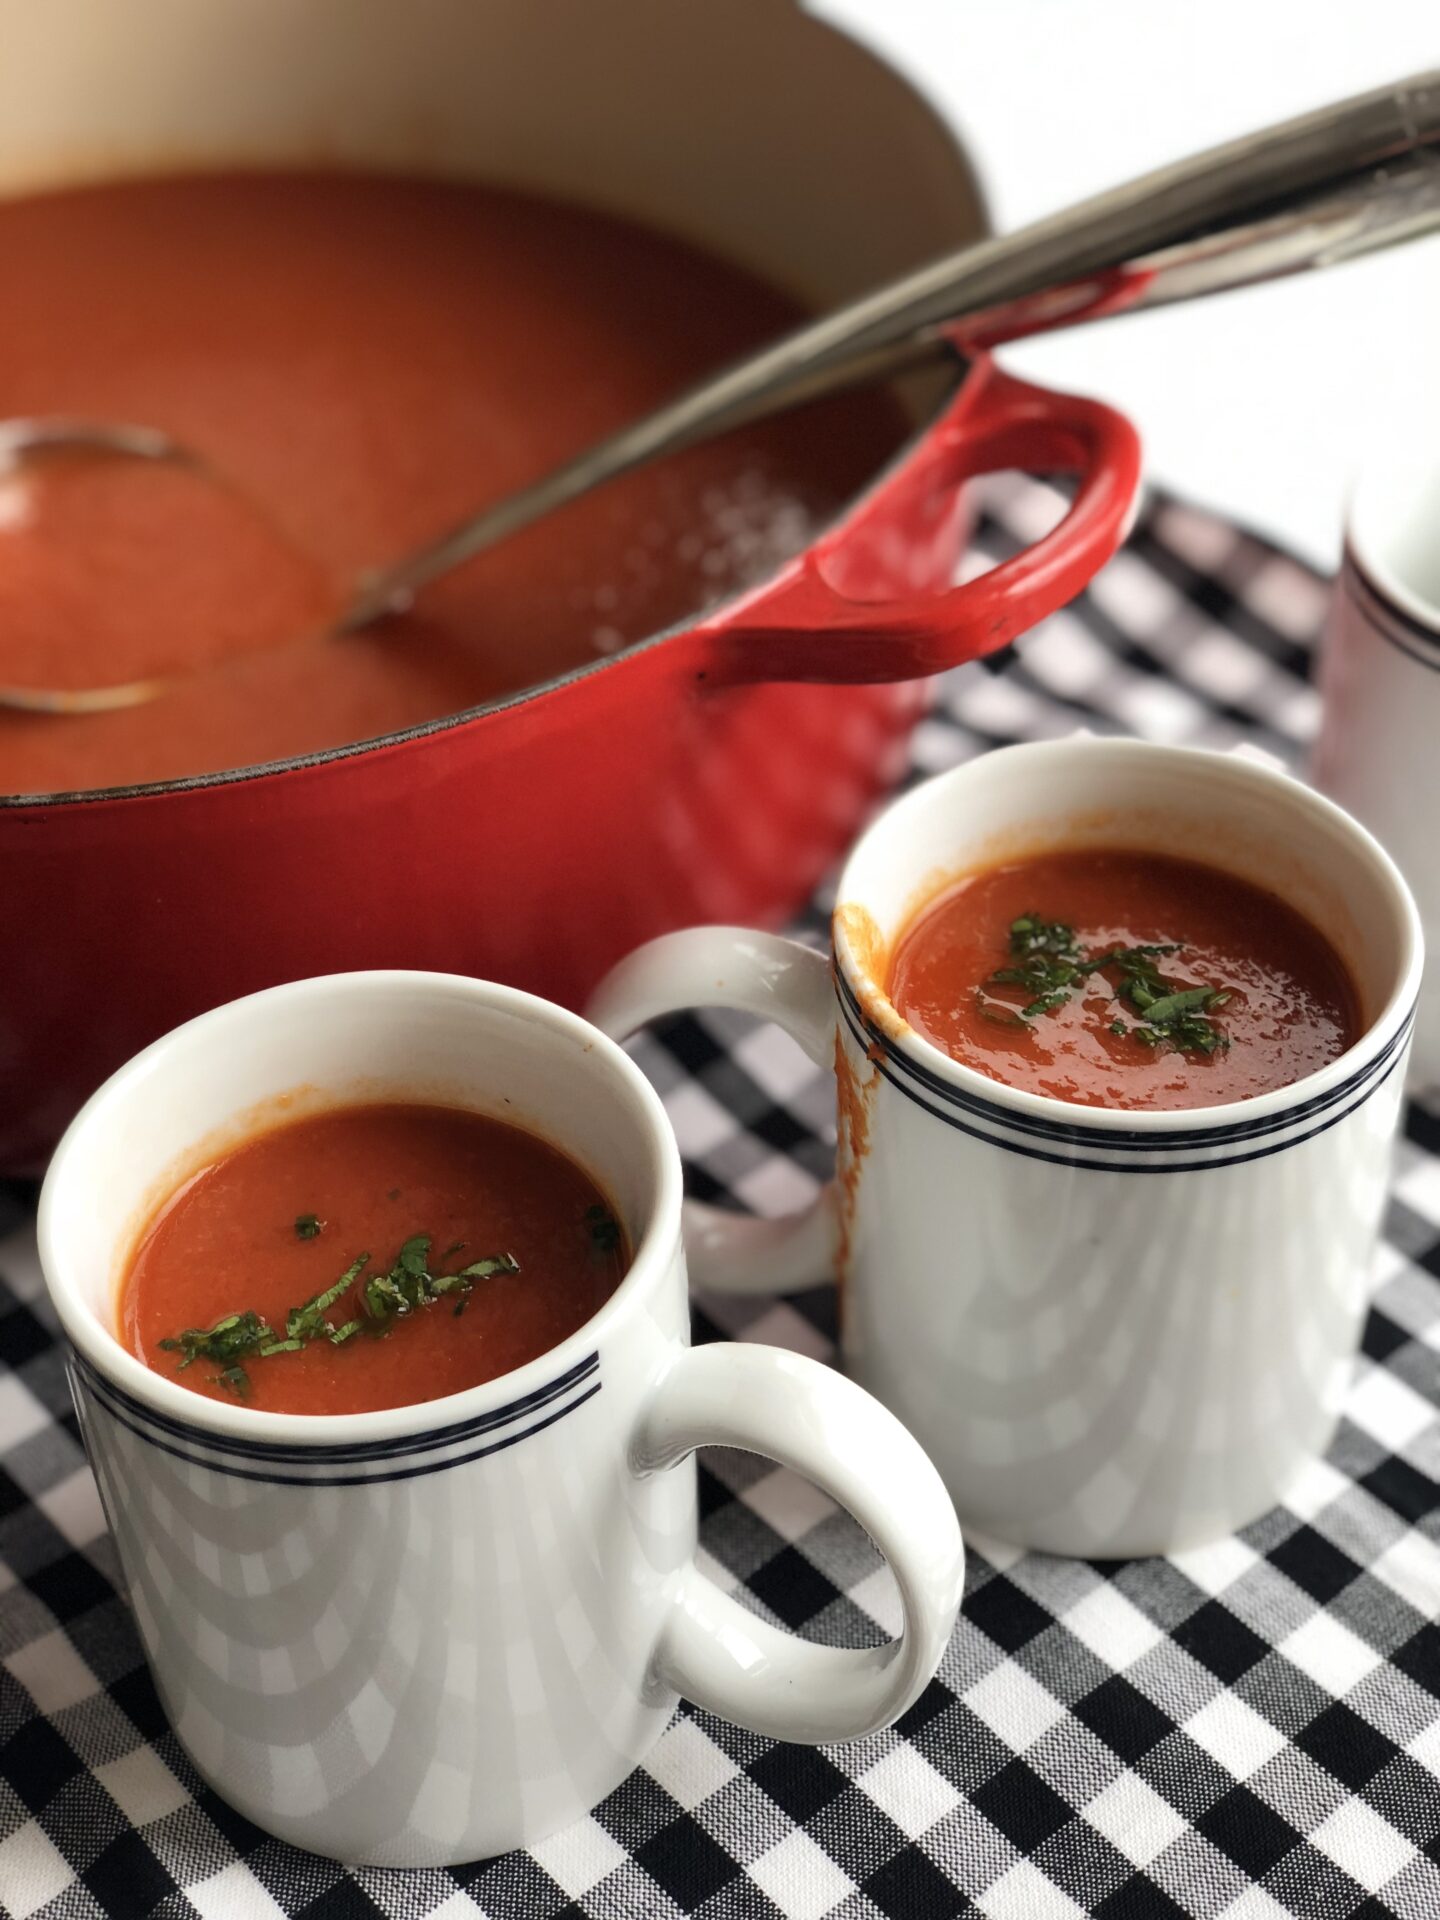 A red enamelled pot of tomato soup with a ladle and two mugs, on a black and white gingham tablecloth